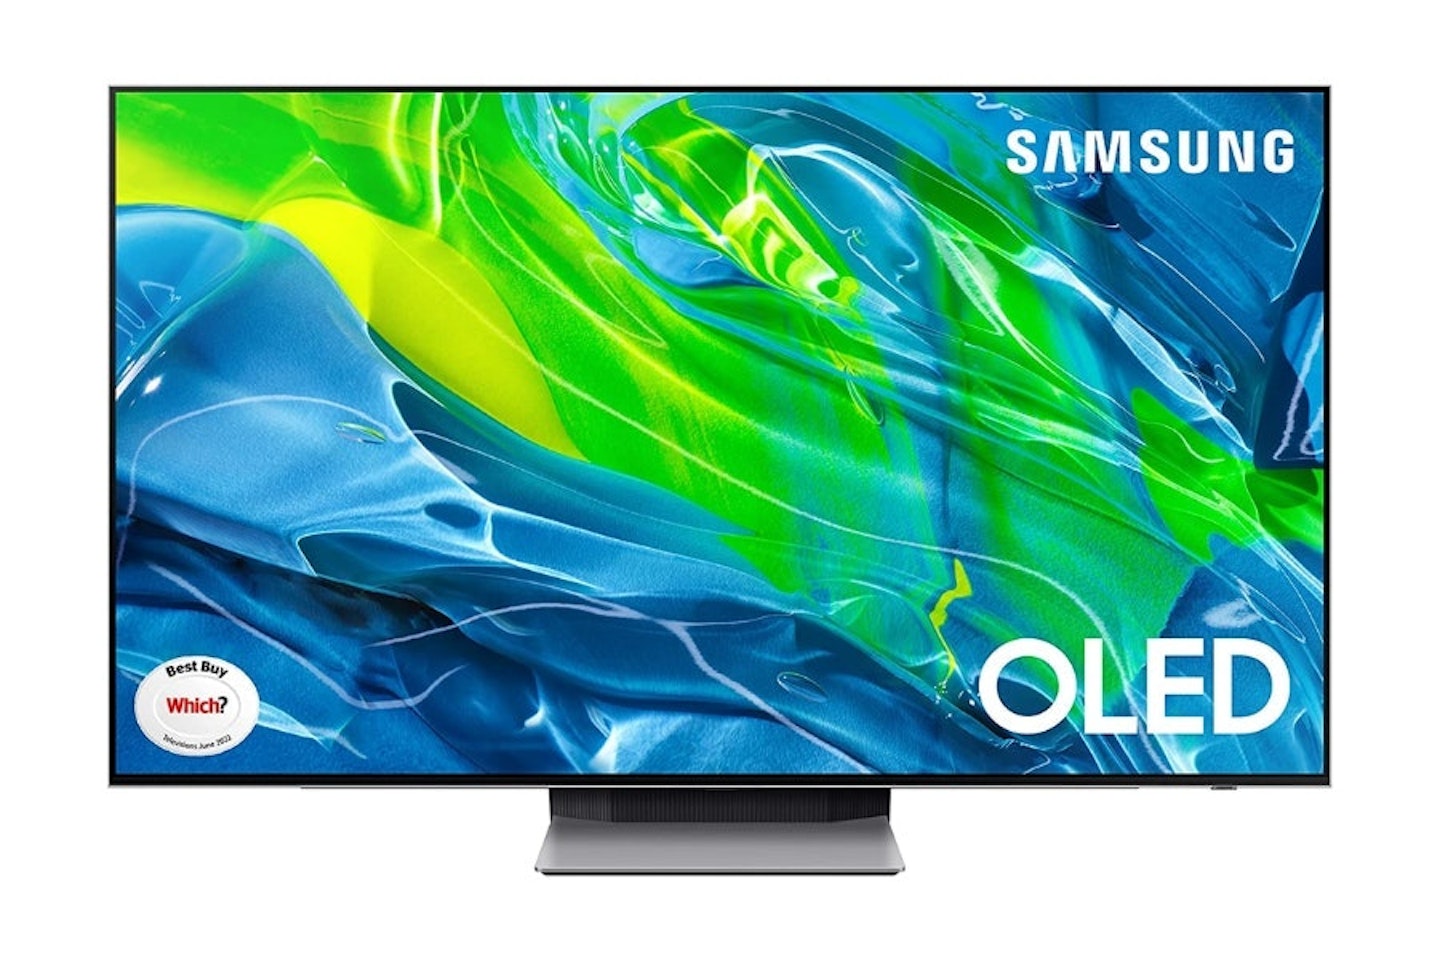 Samsung OLED 4K S95B QD OLED TV - one of the best 4K TVs for Xbox series X